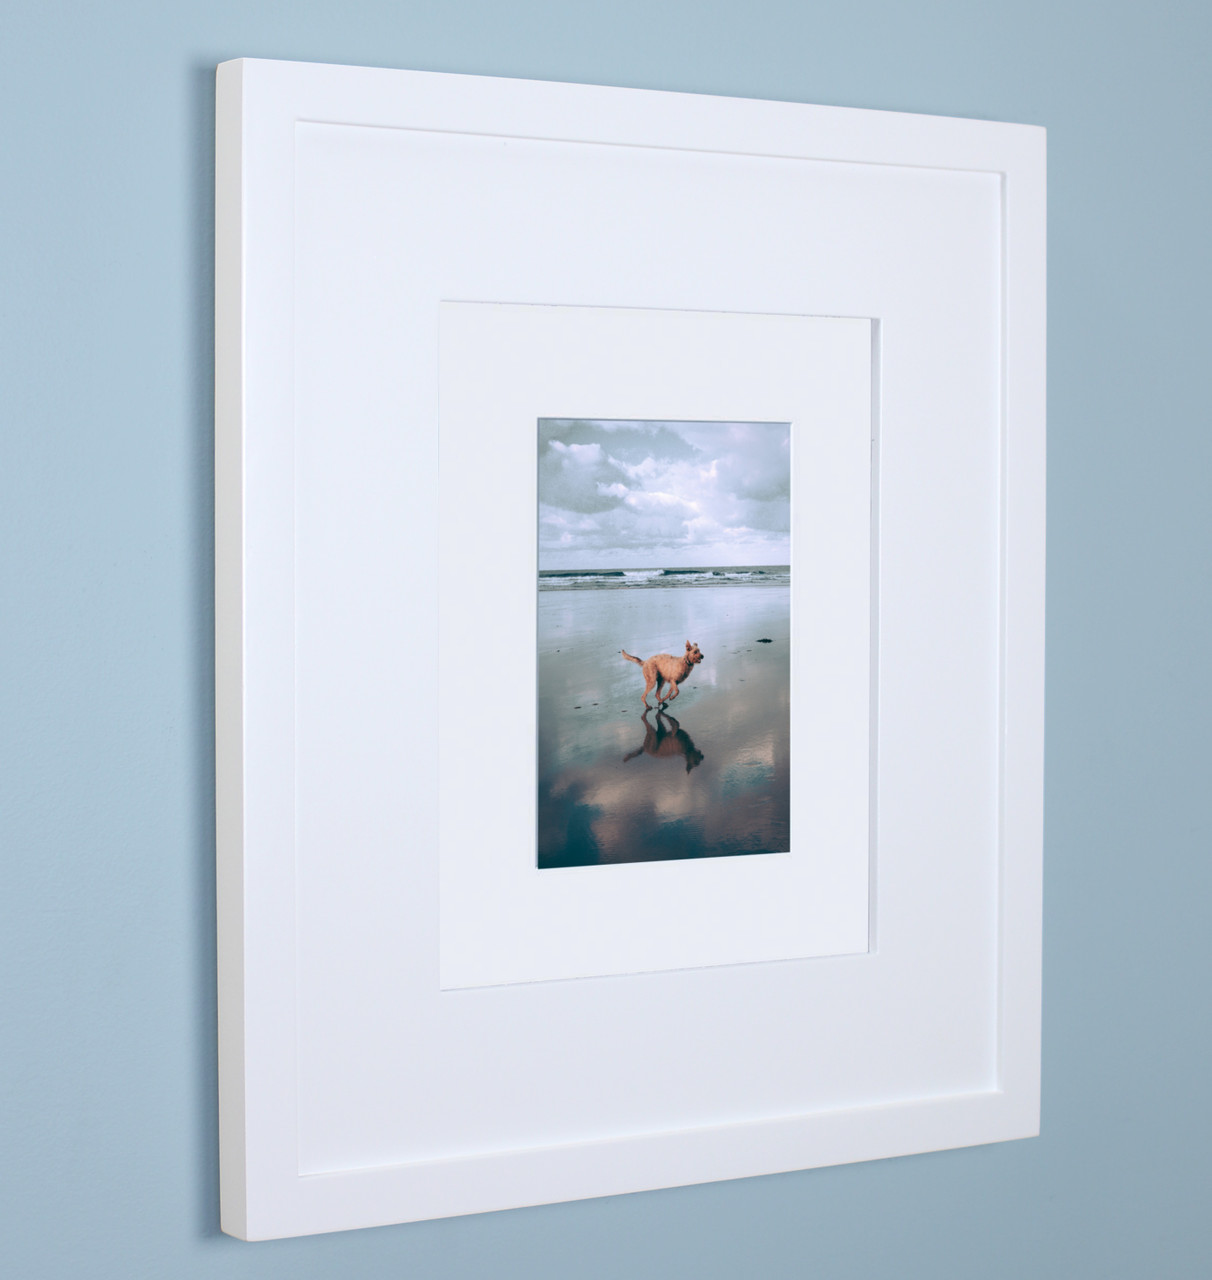 Compact Portrait White Contemporary Recessed Picture Frame